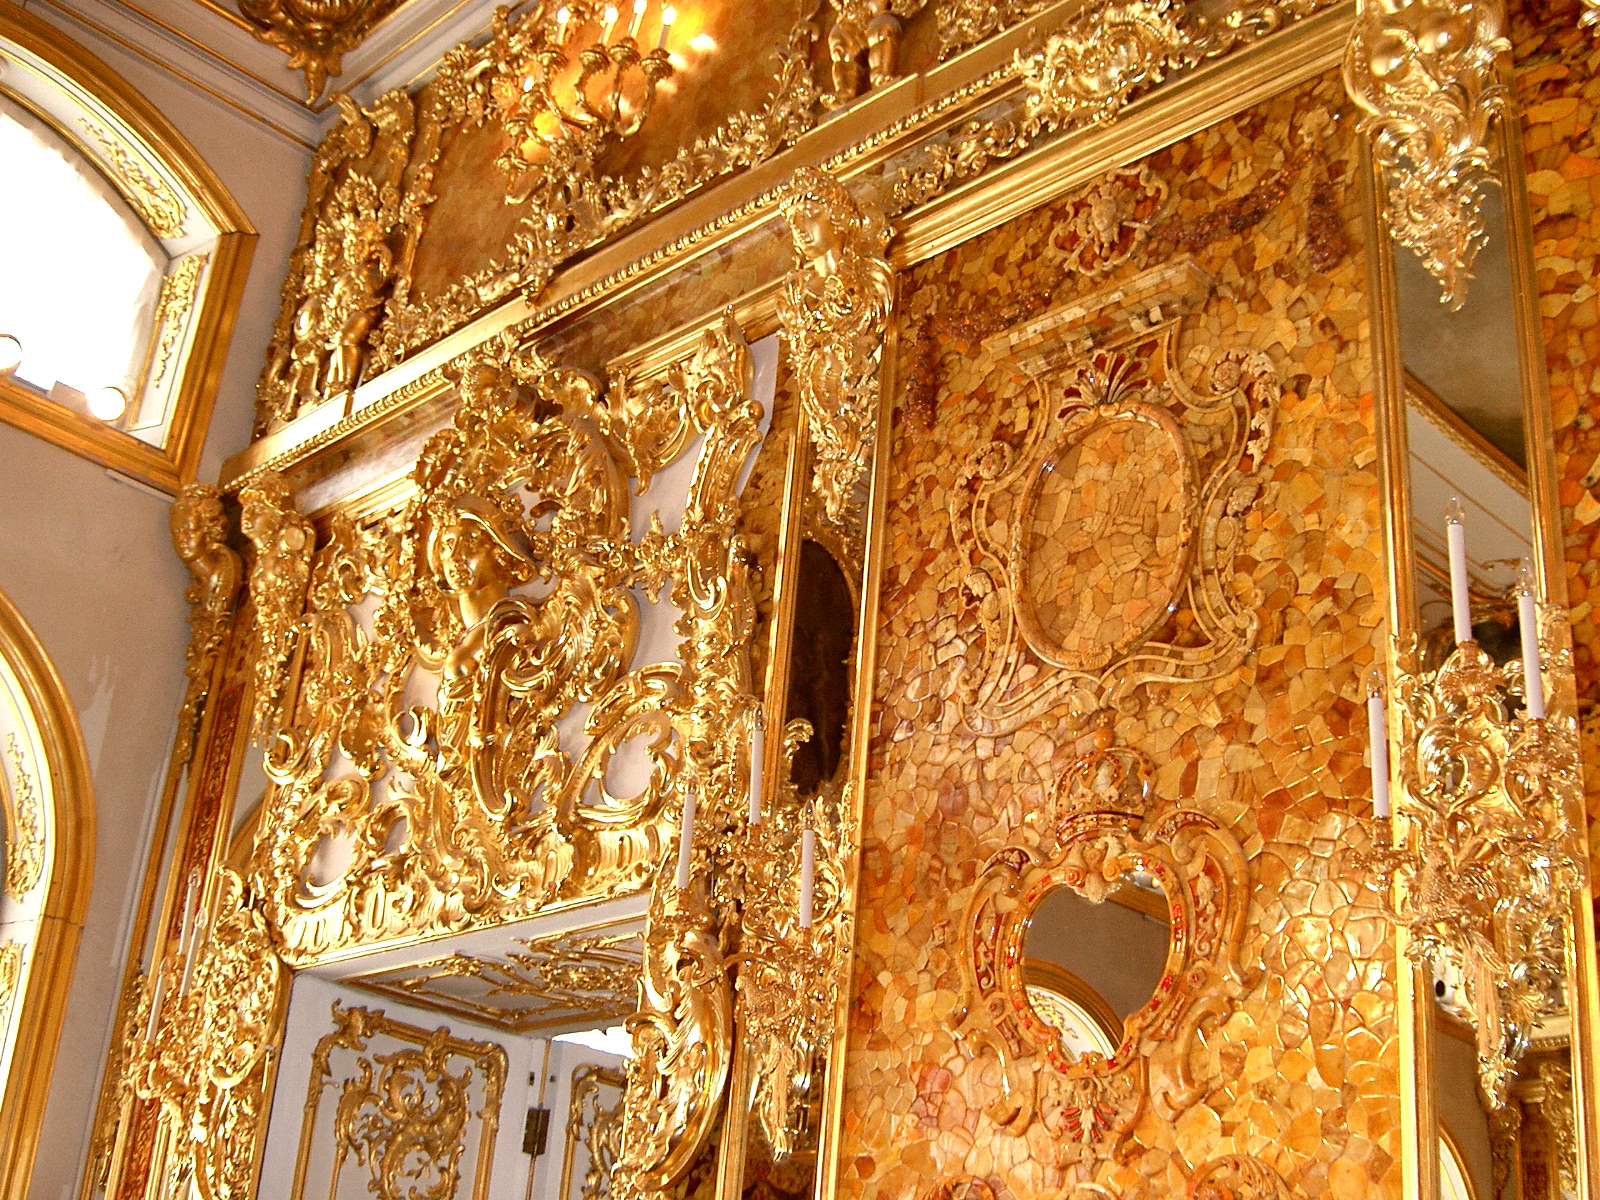 Copy of Interior shot of the Amber Room, by jeanyfan on Wikimedia Commons - Own work, Public Domain